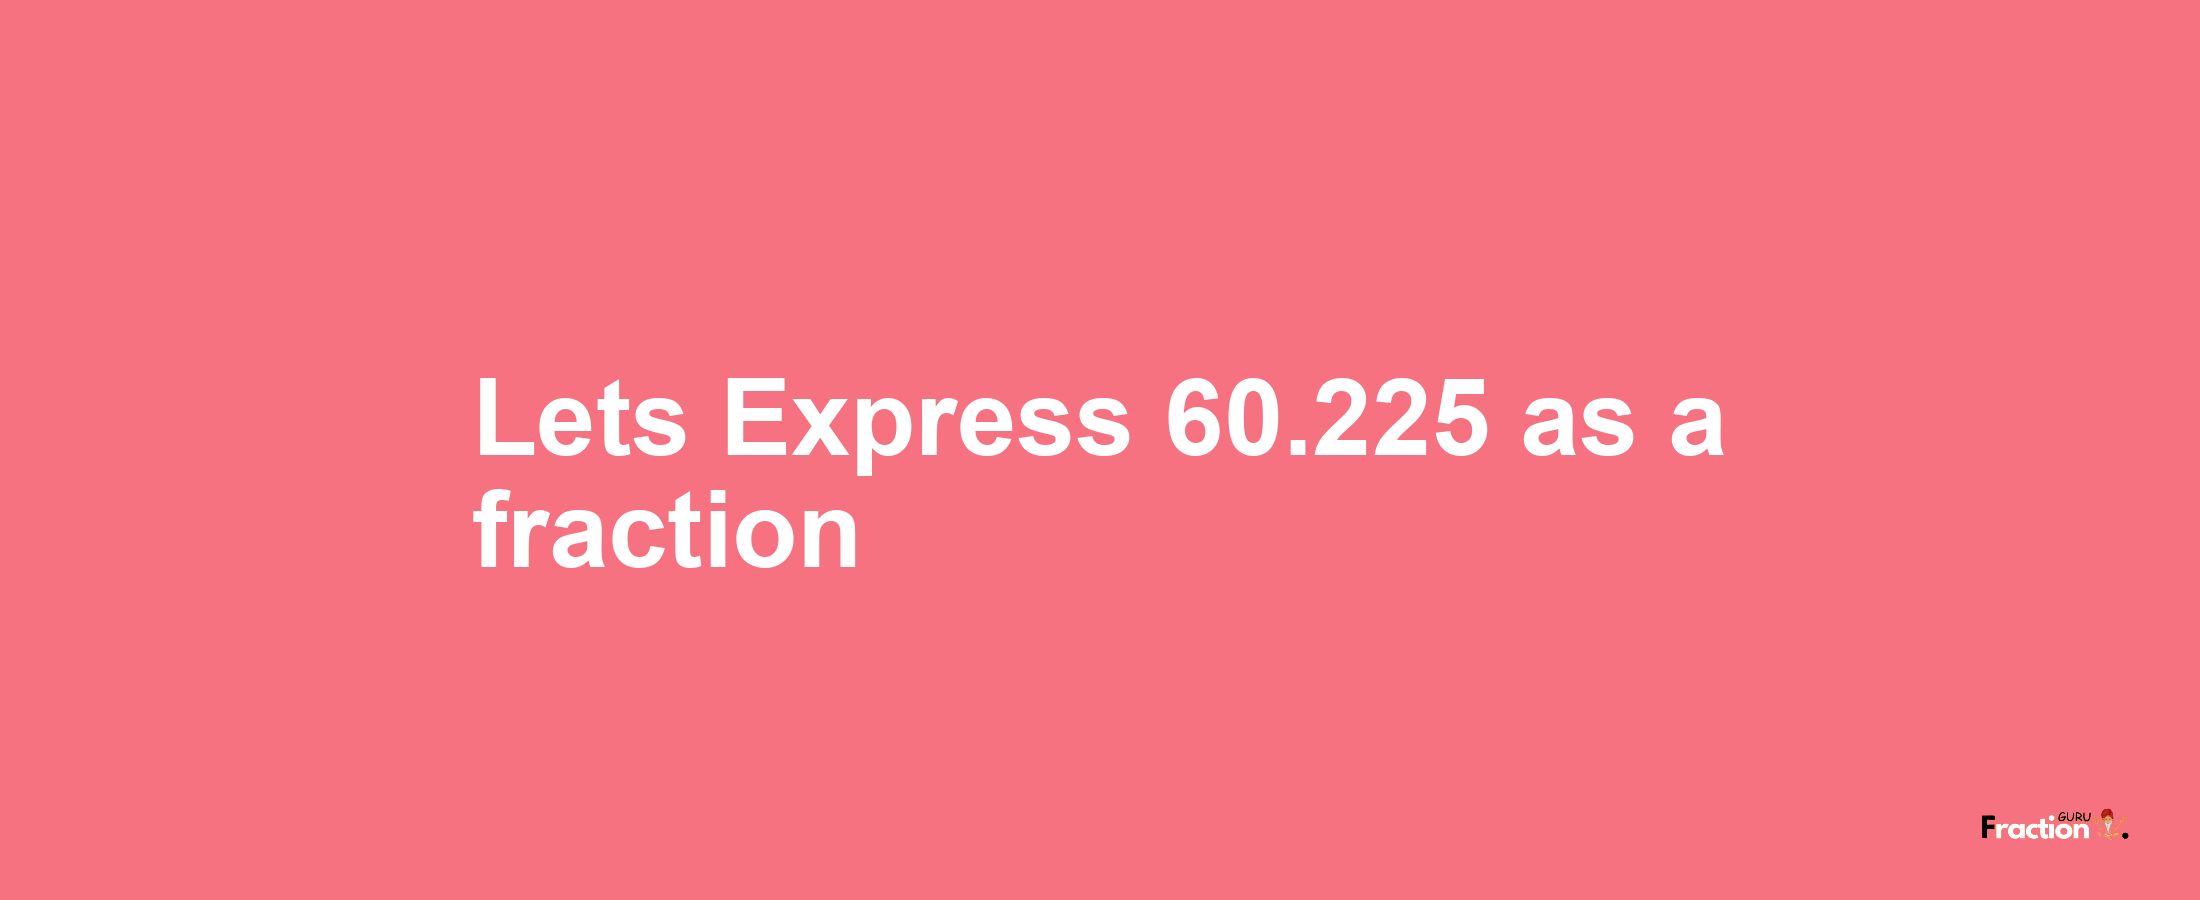 Lets Express 60.225 as afraction